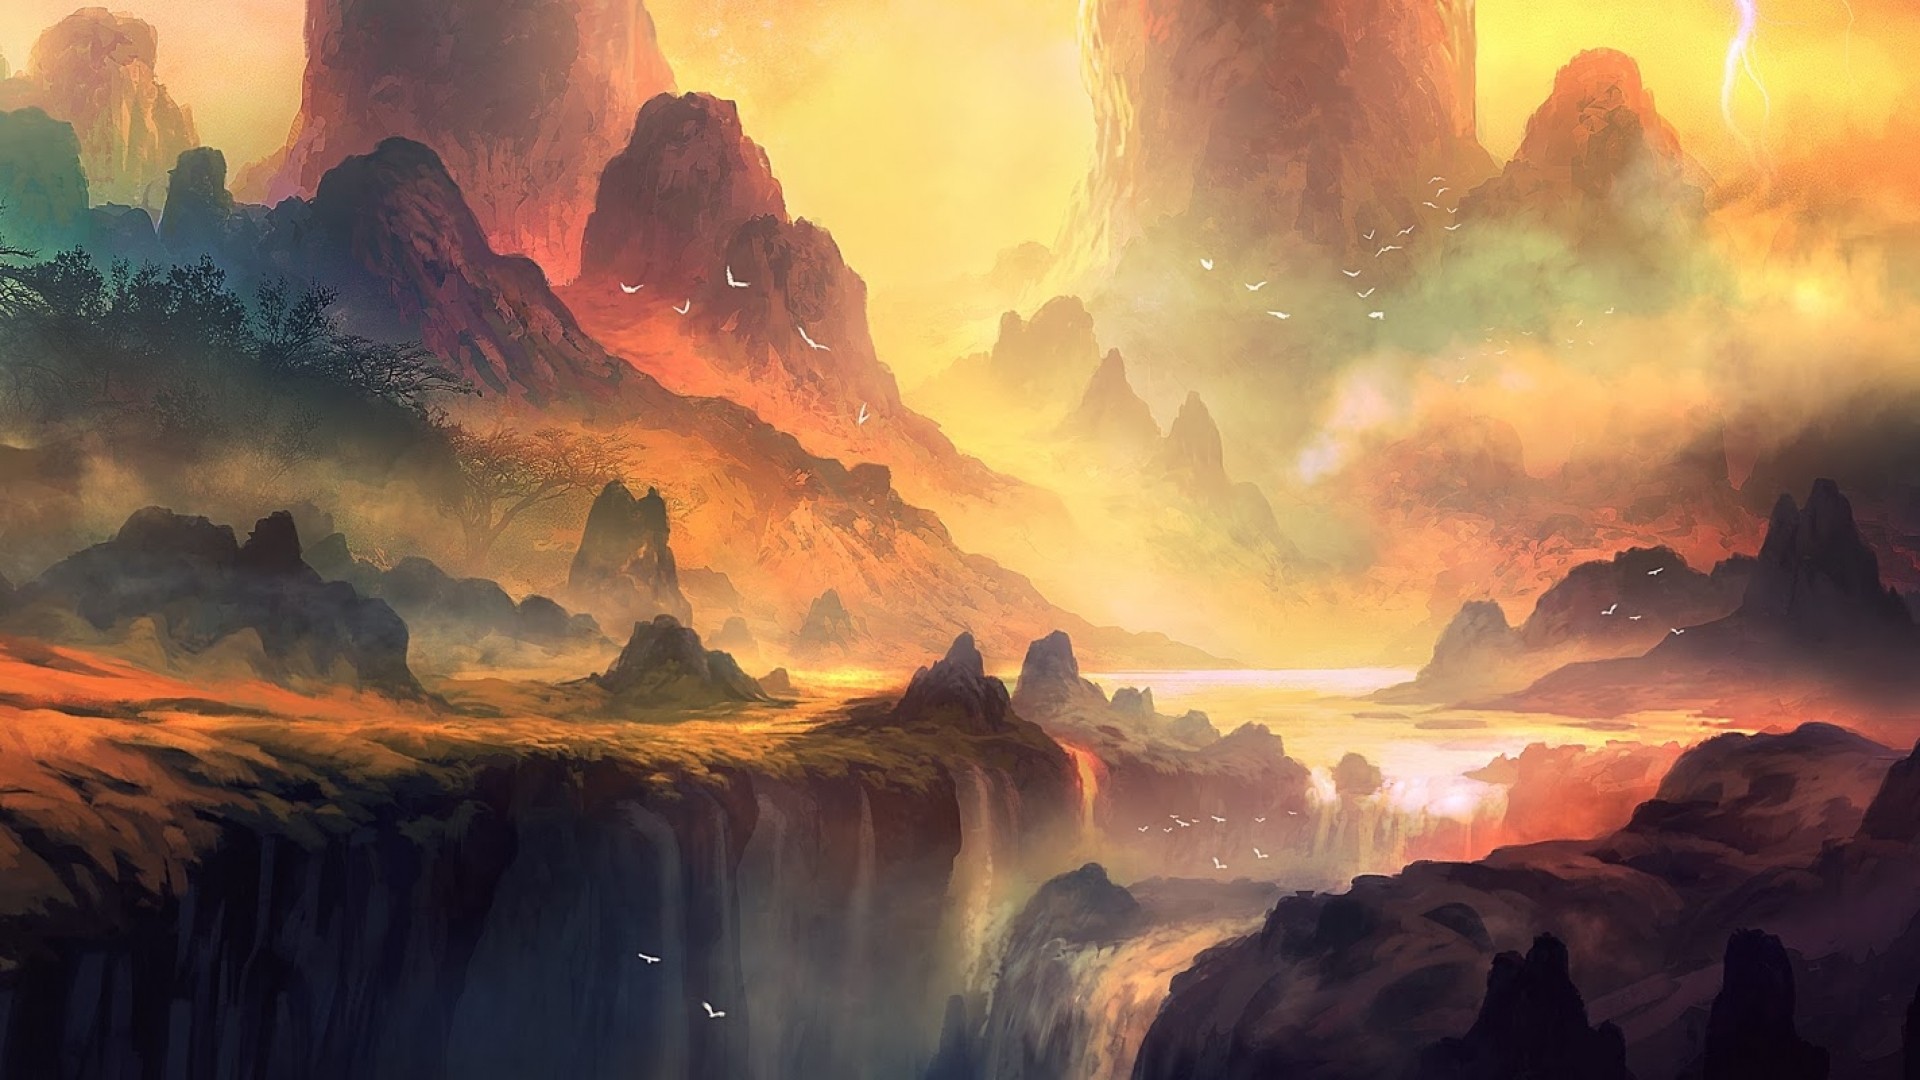 General 1920x1080 artwork fantasy art waterfall mountains landscape forest colorful sunlight mist